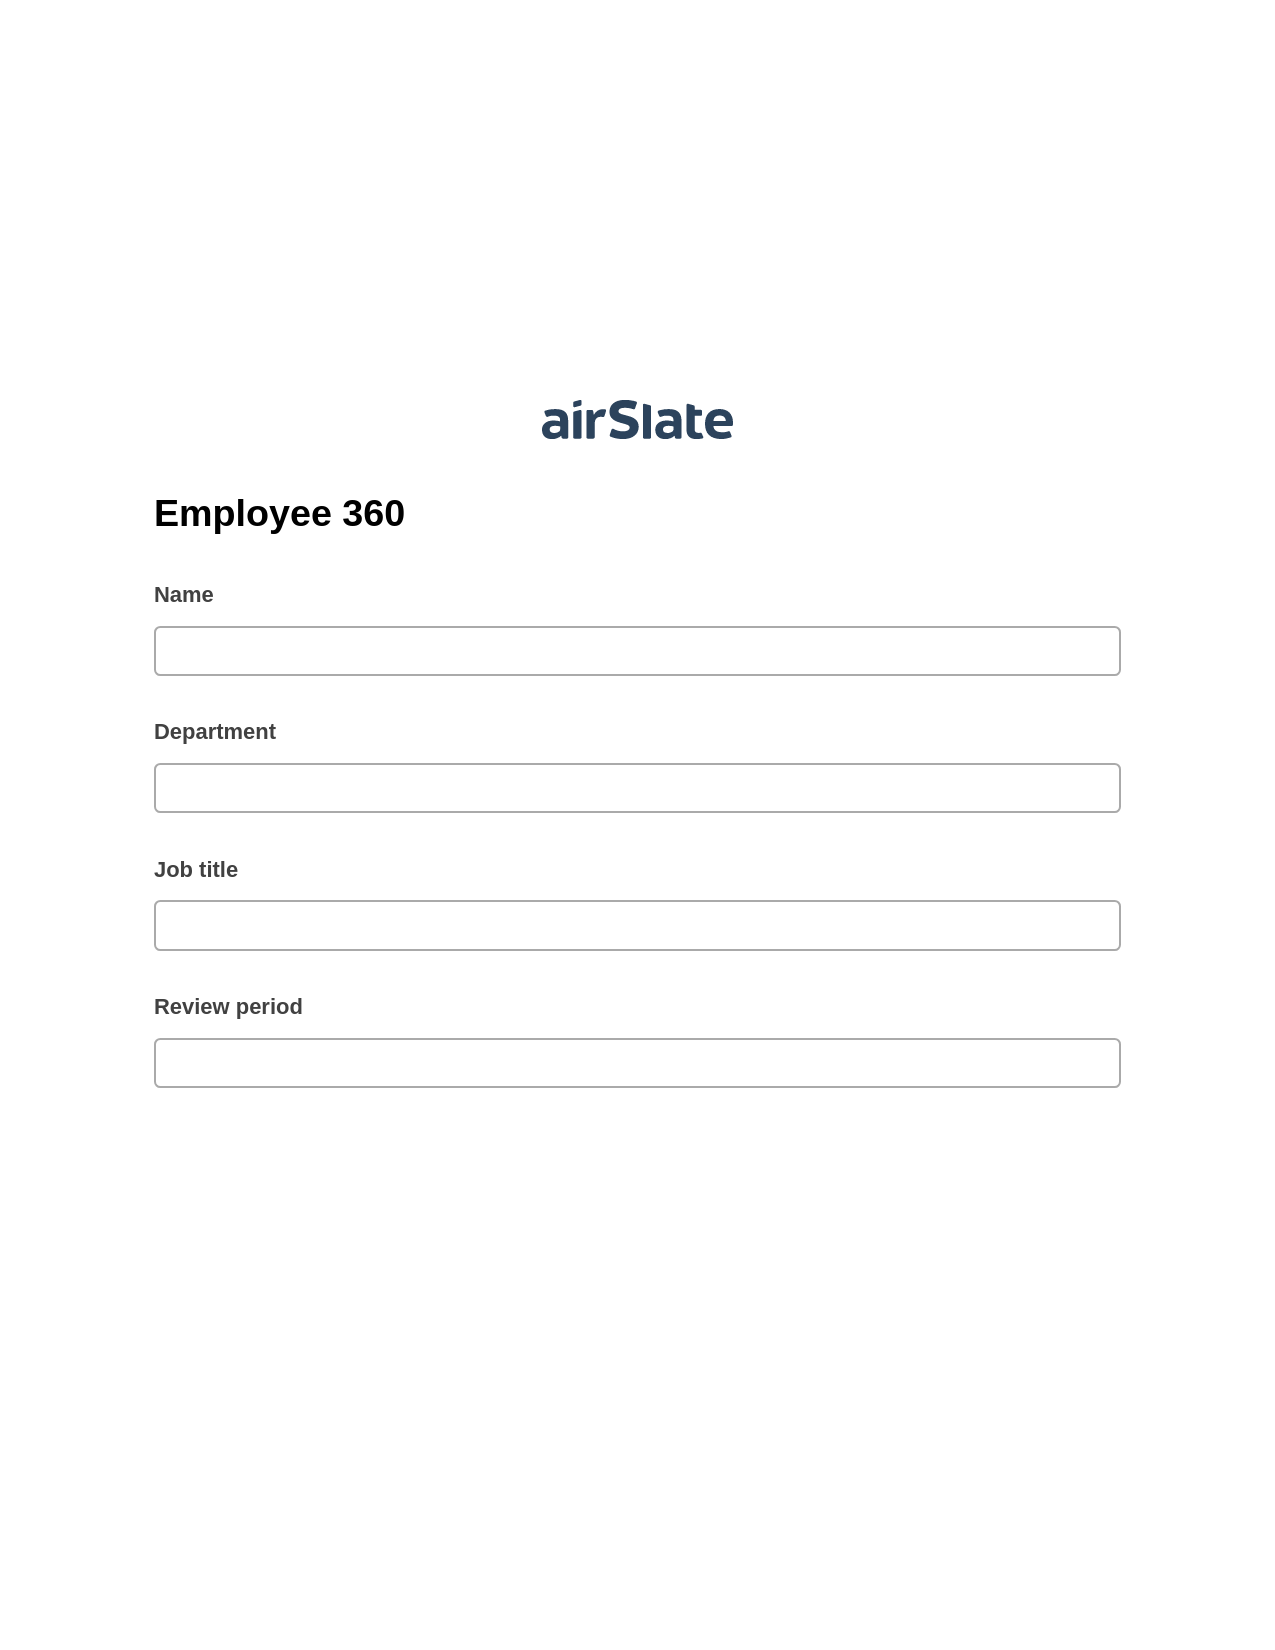 Employee 360 Pre-fill from MS Dynamics 365 Records, Export to MS Dynamics 365 Bot, Export to Excel 365 Bot